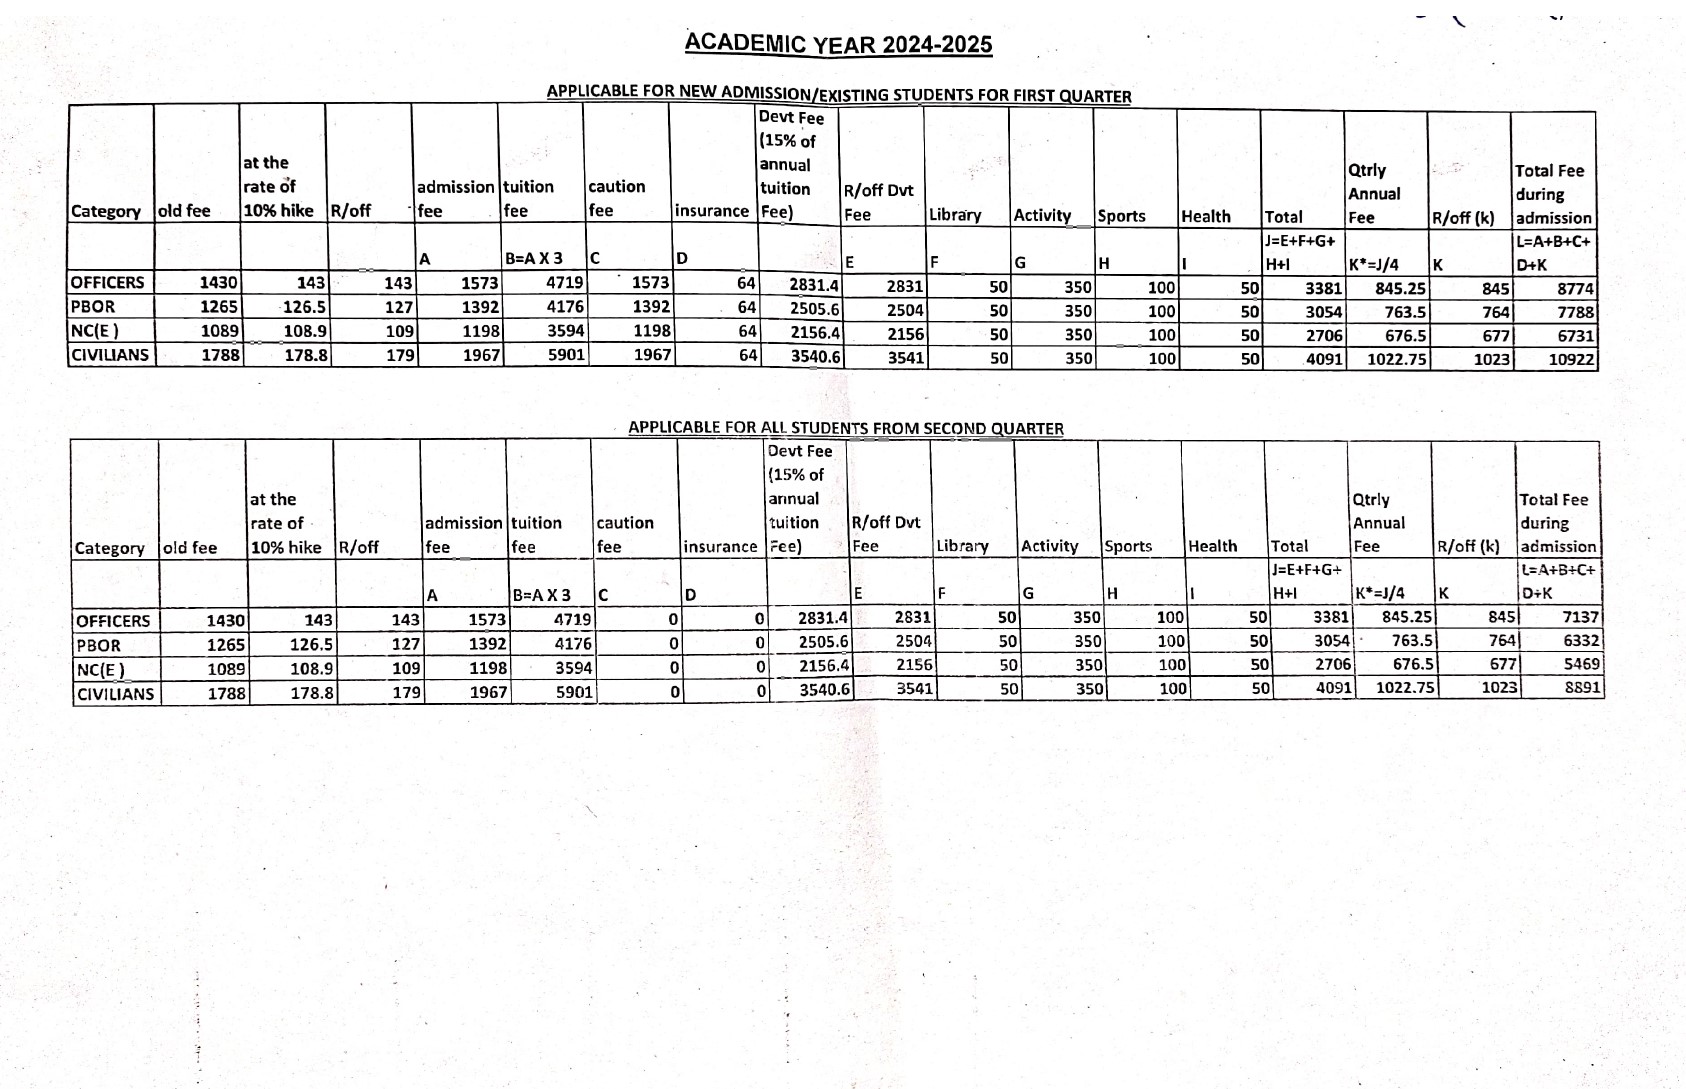 Fee Structure - Air Force School, Amritsar Cantt.